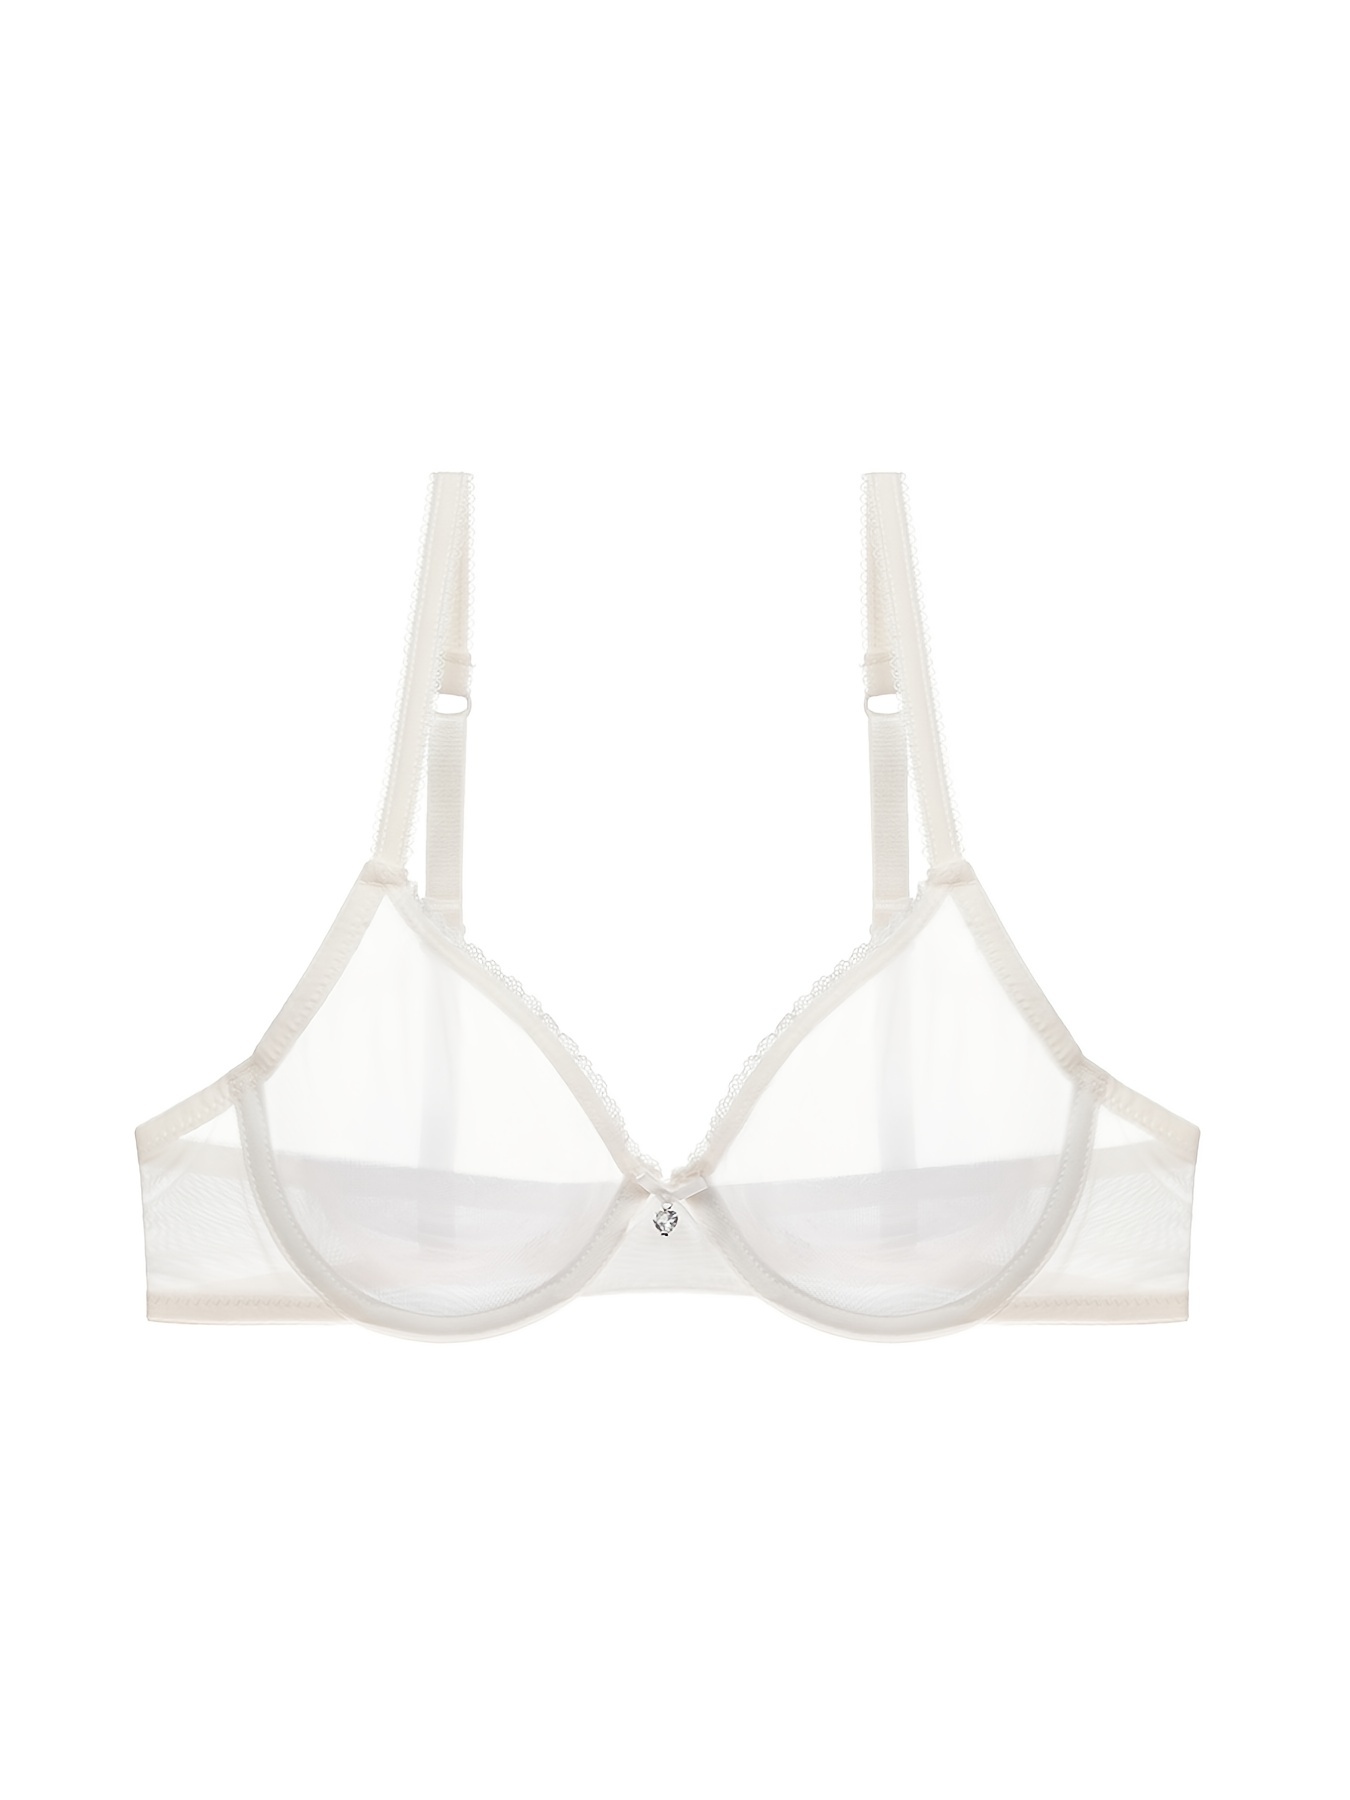 Buy ORENZY Women Cotton Non Padded Transparent Strap Bra- Pack of 4 at